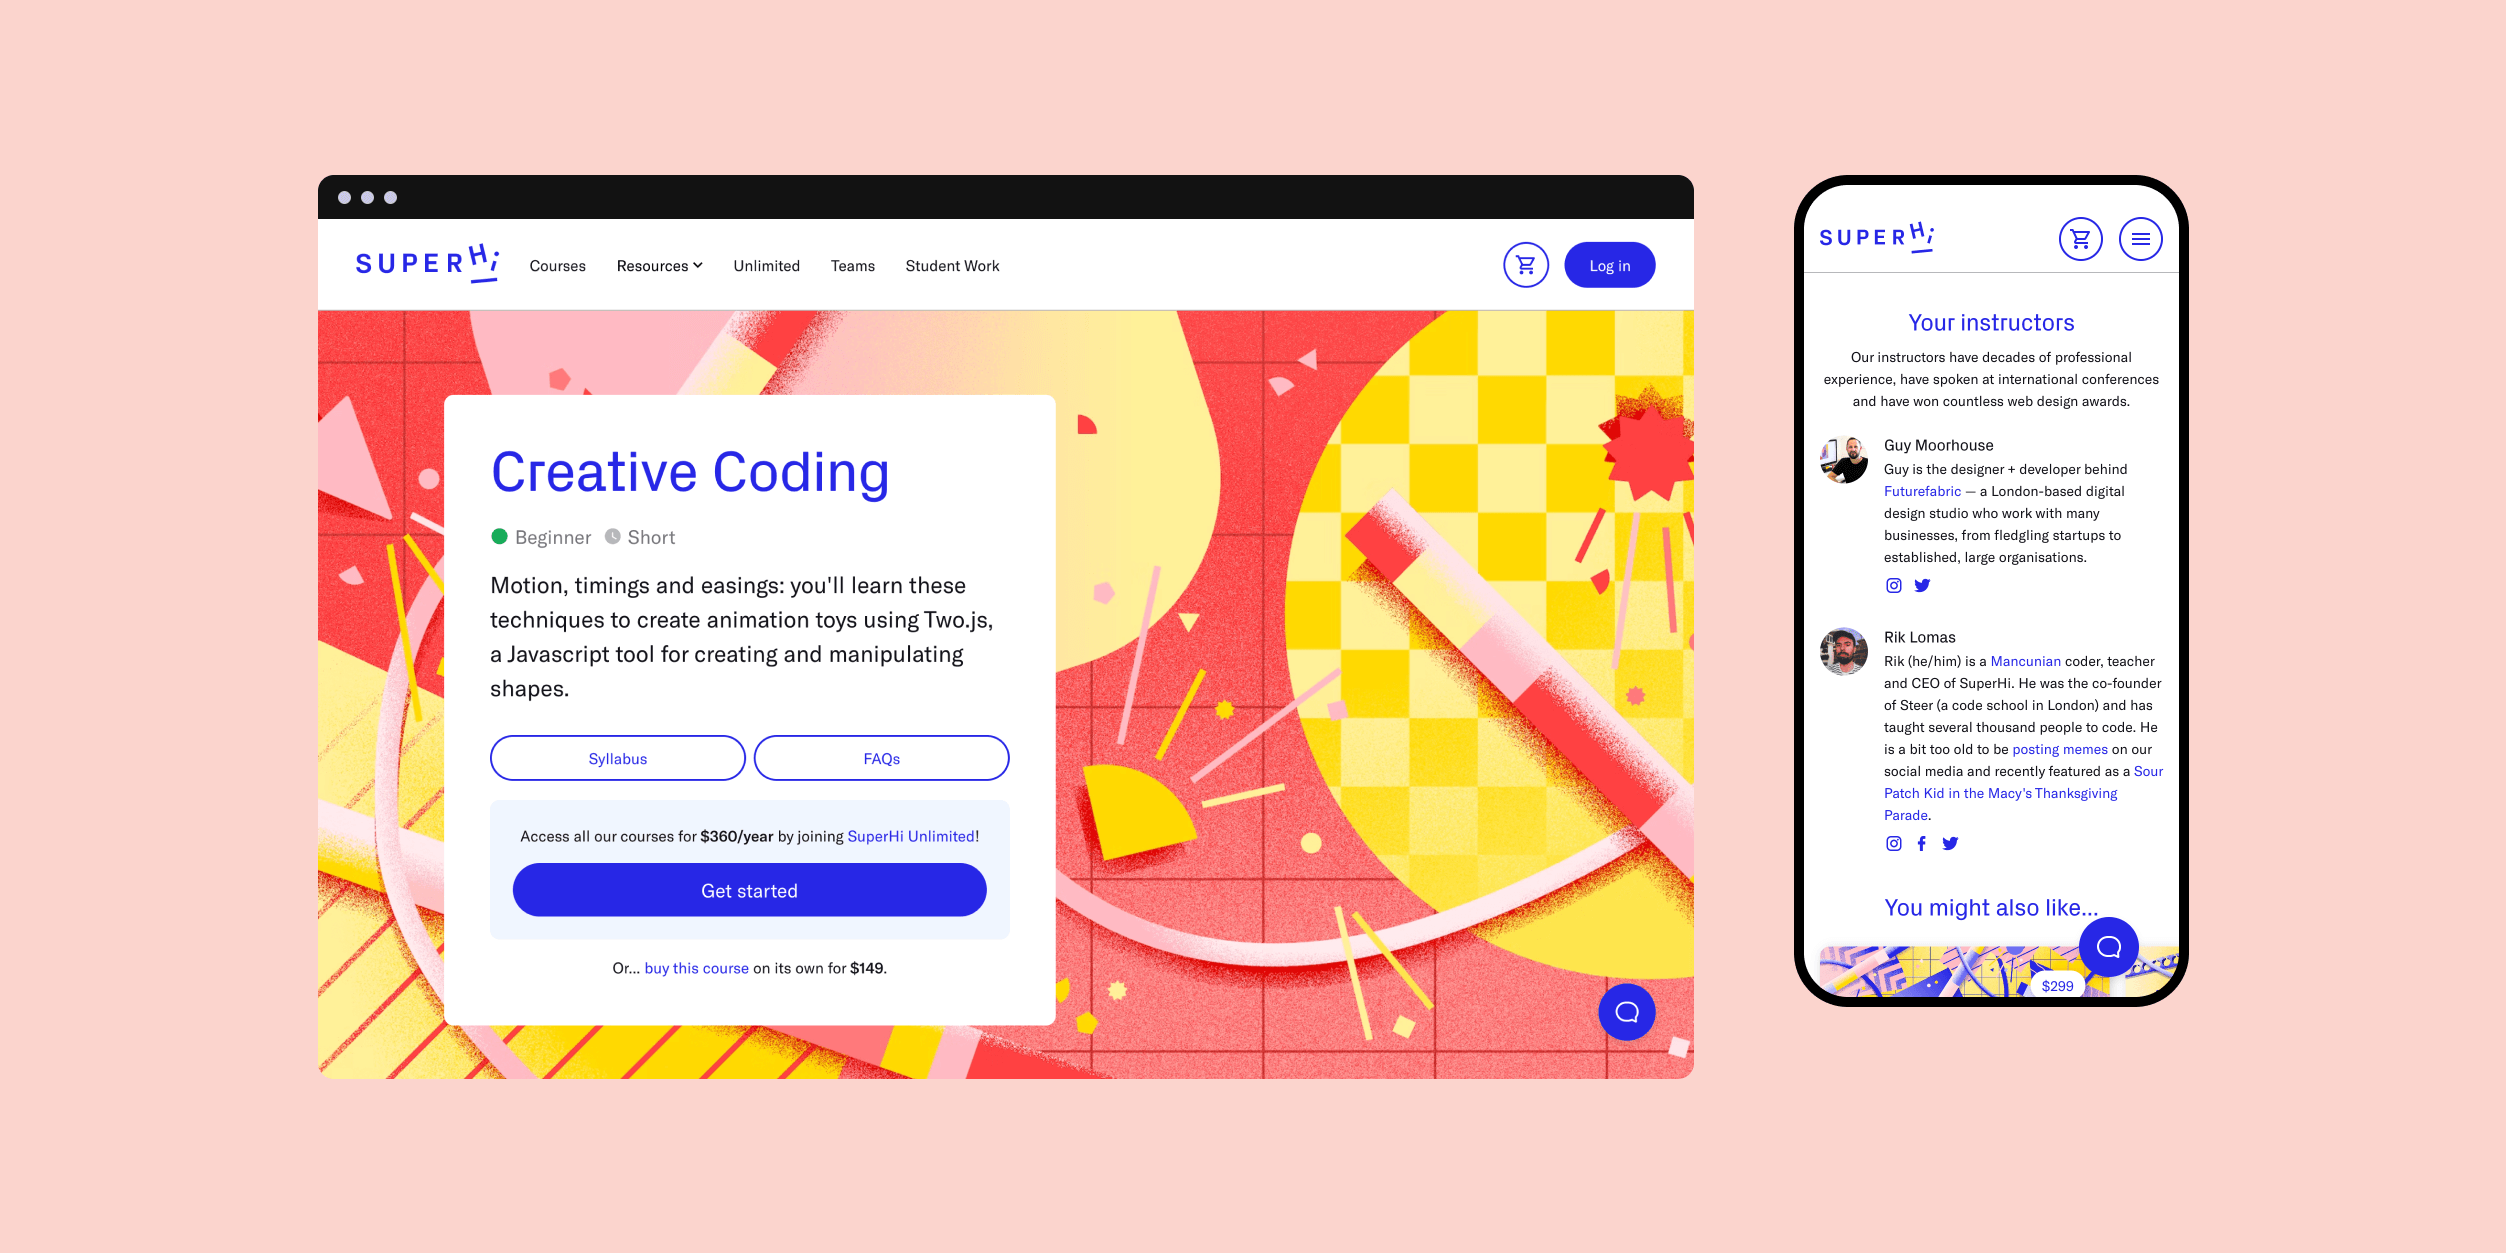 Two screenshots of the SuperHi webpage for the Creative Coding Course, one on a large screen and one on a mobile device.